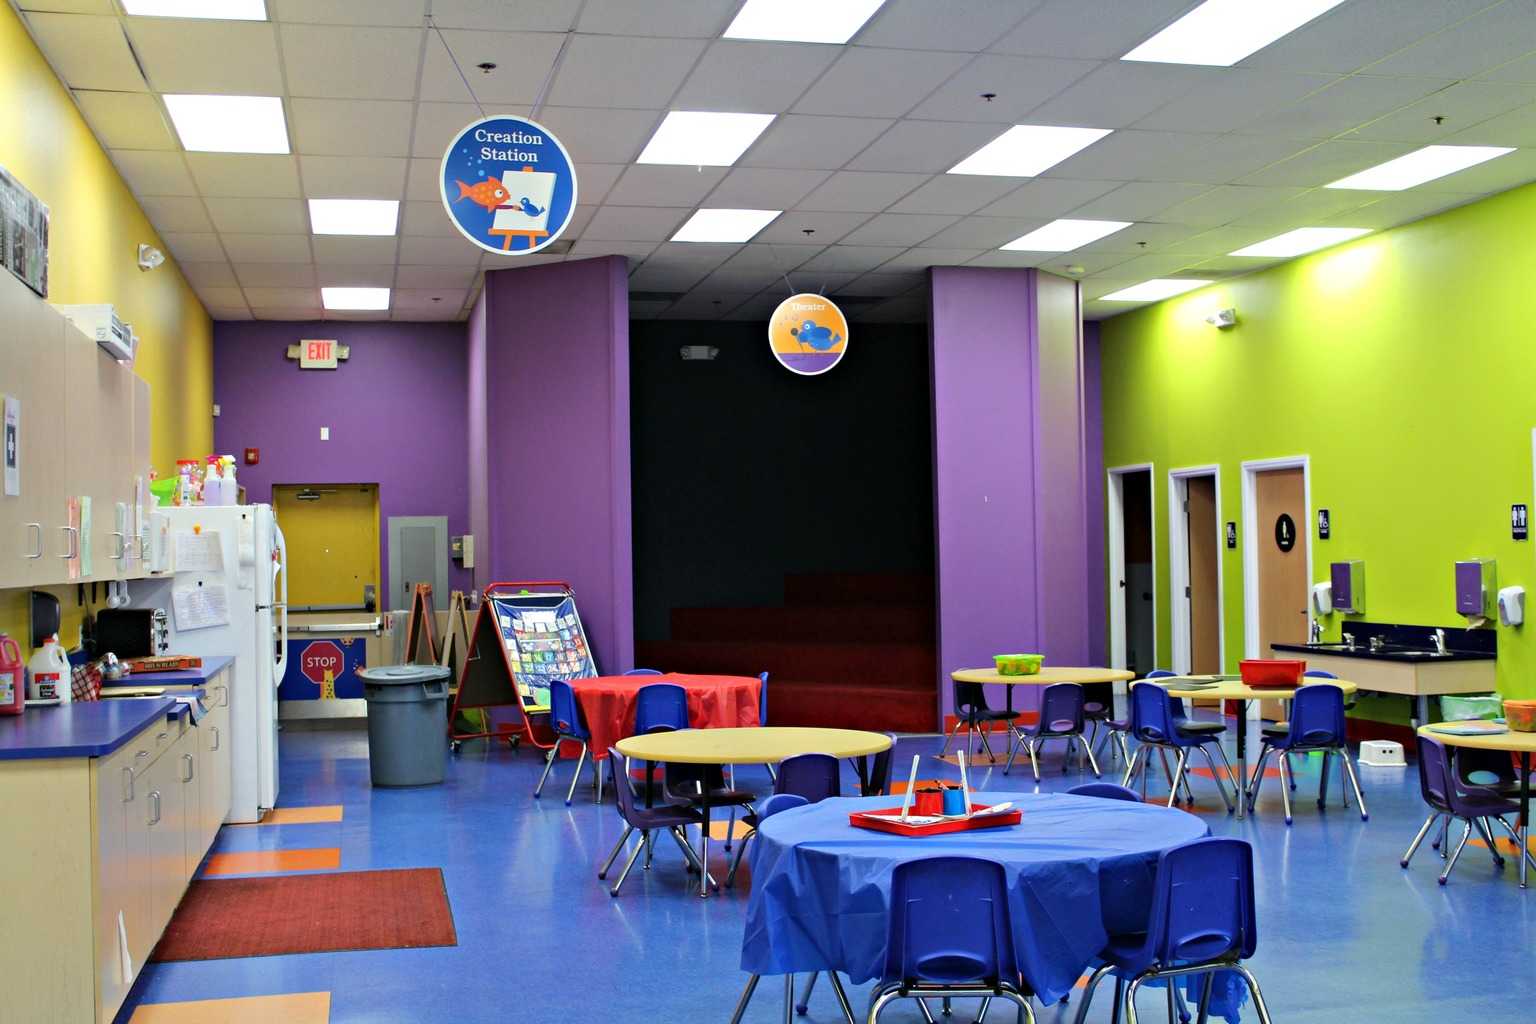 Are you in need of last minute childcare? Then check out KidsPark, an hourly childcare facility with locations nationwide.